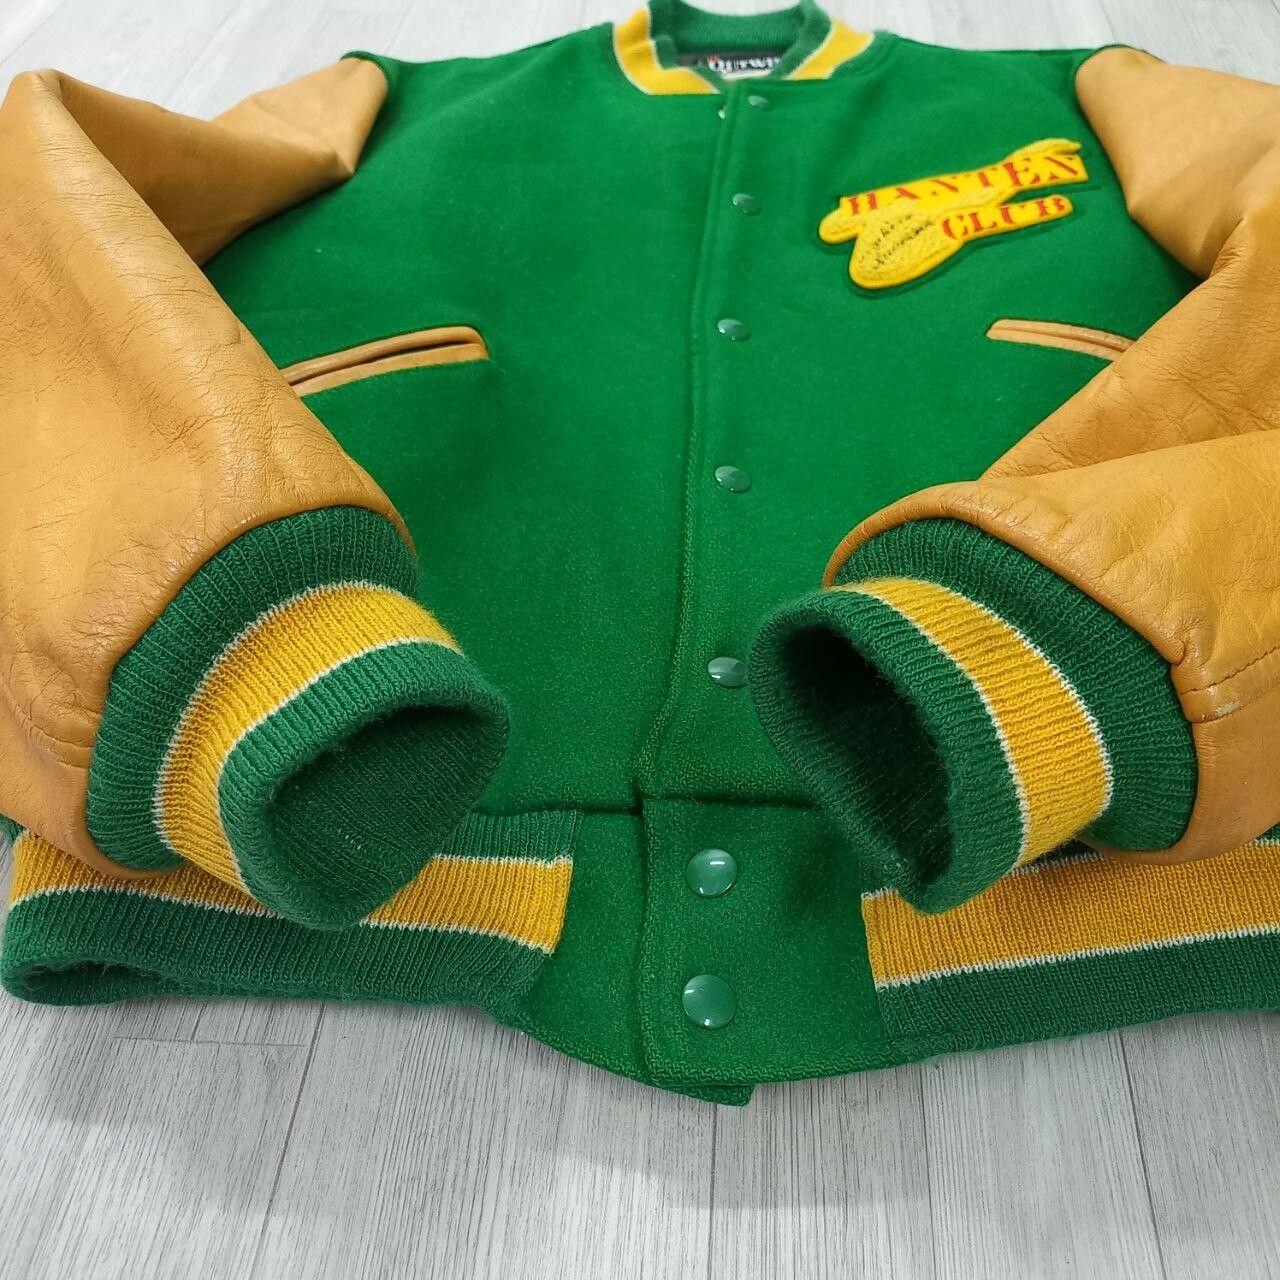 Union Made - HANTEN CLUB 1984 by BUTWIN USA Wool Leather Varsity Jacket - 13